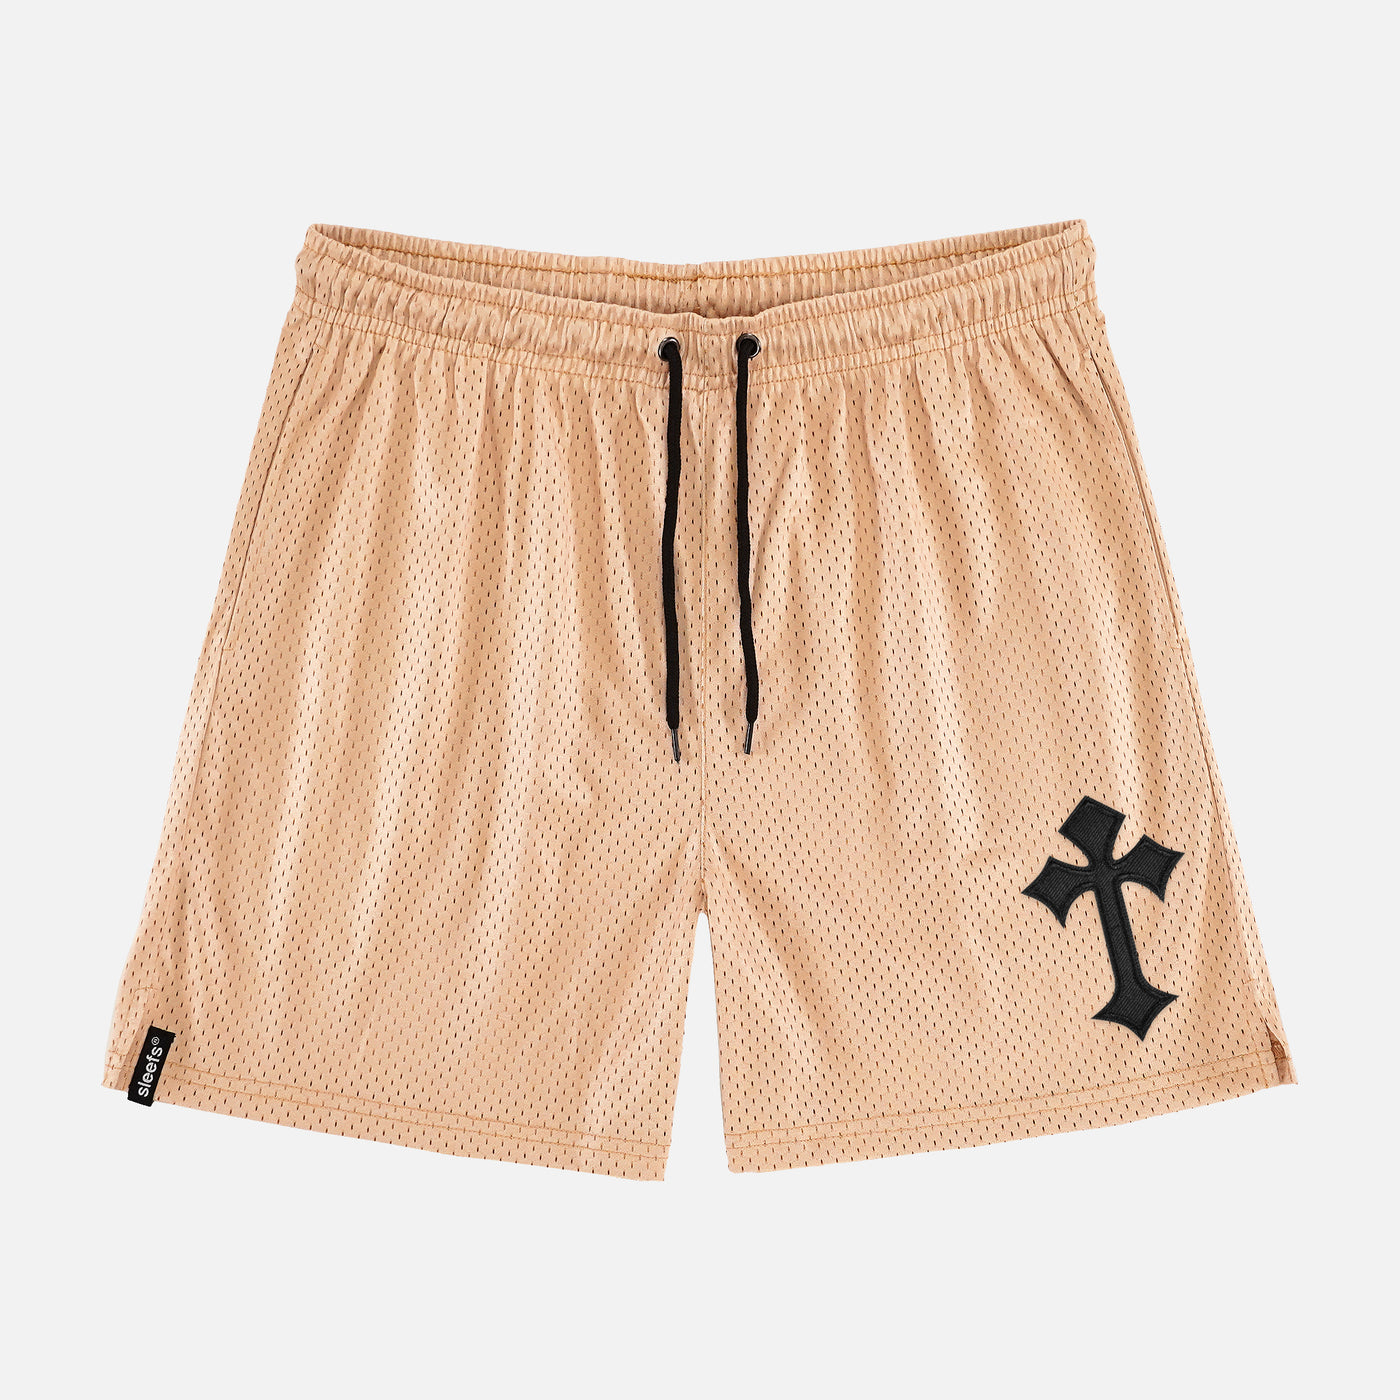 Gothic Cross Patch Shorts - 7"